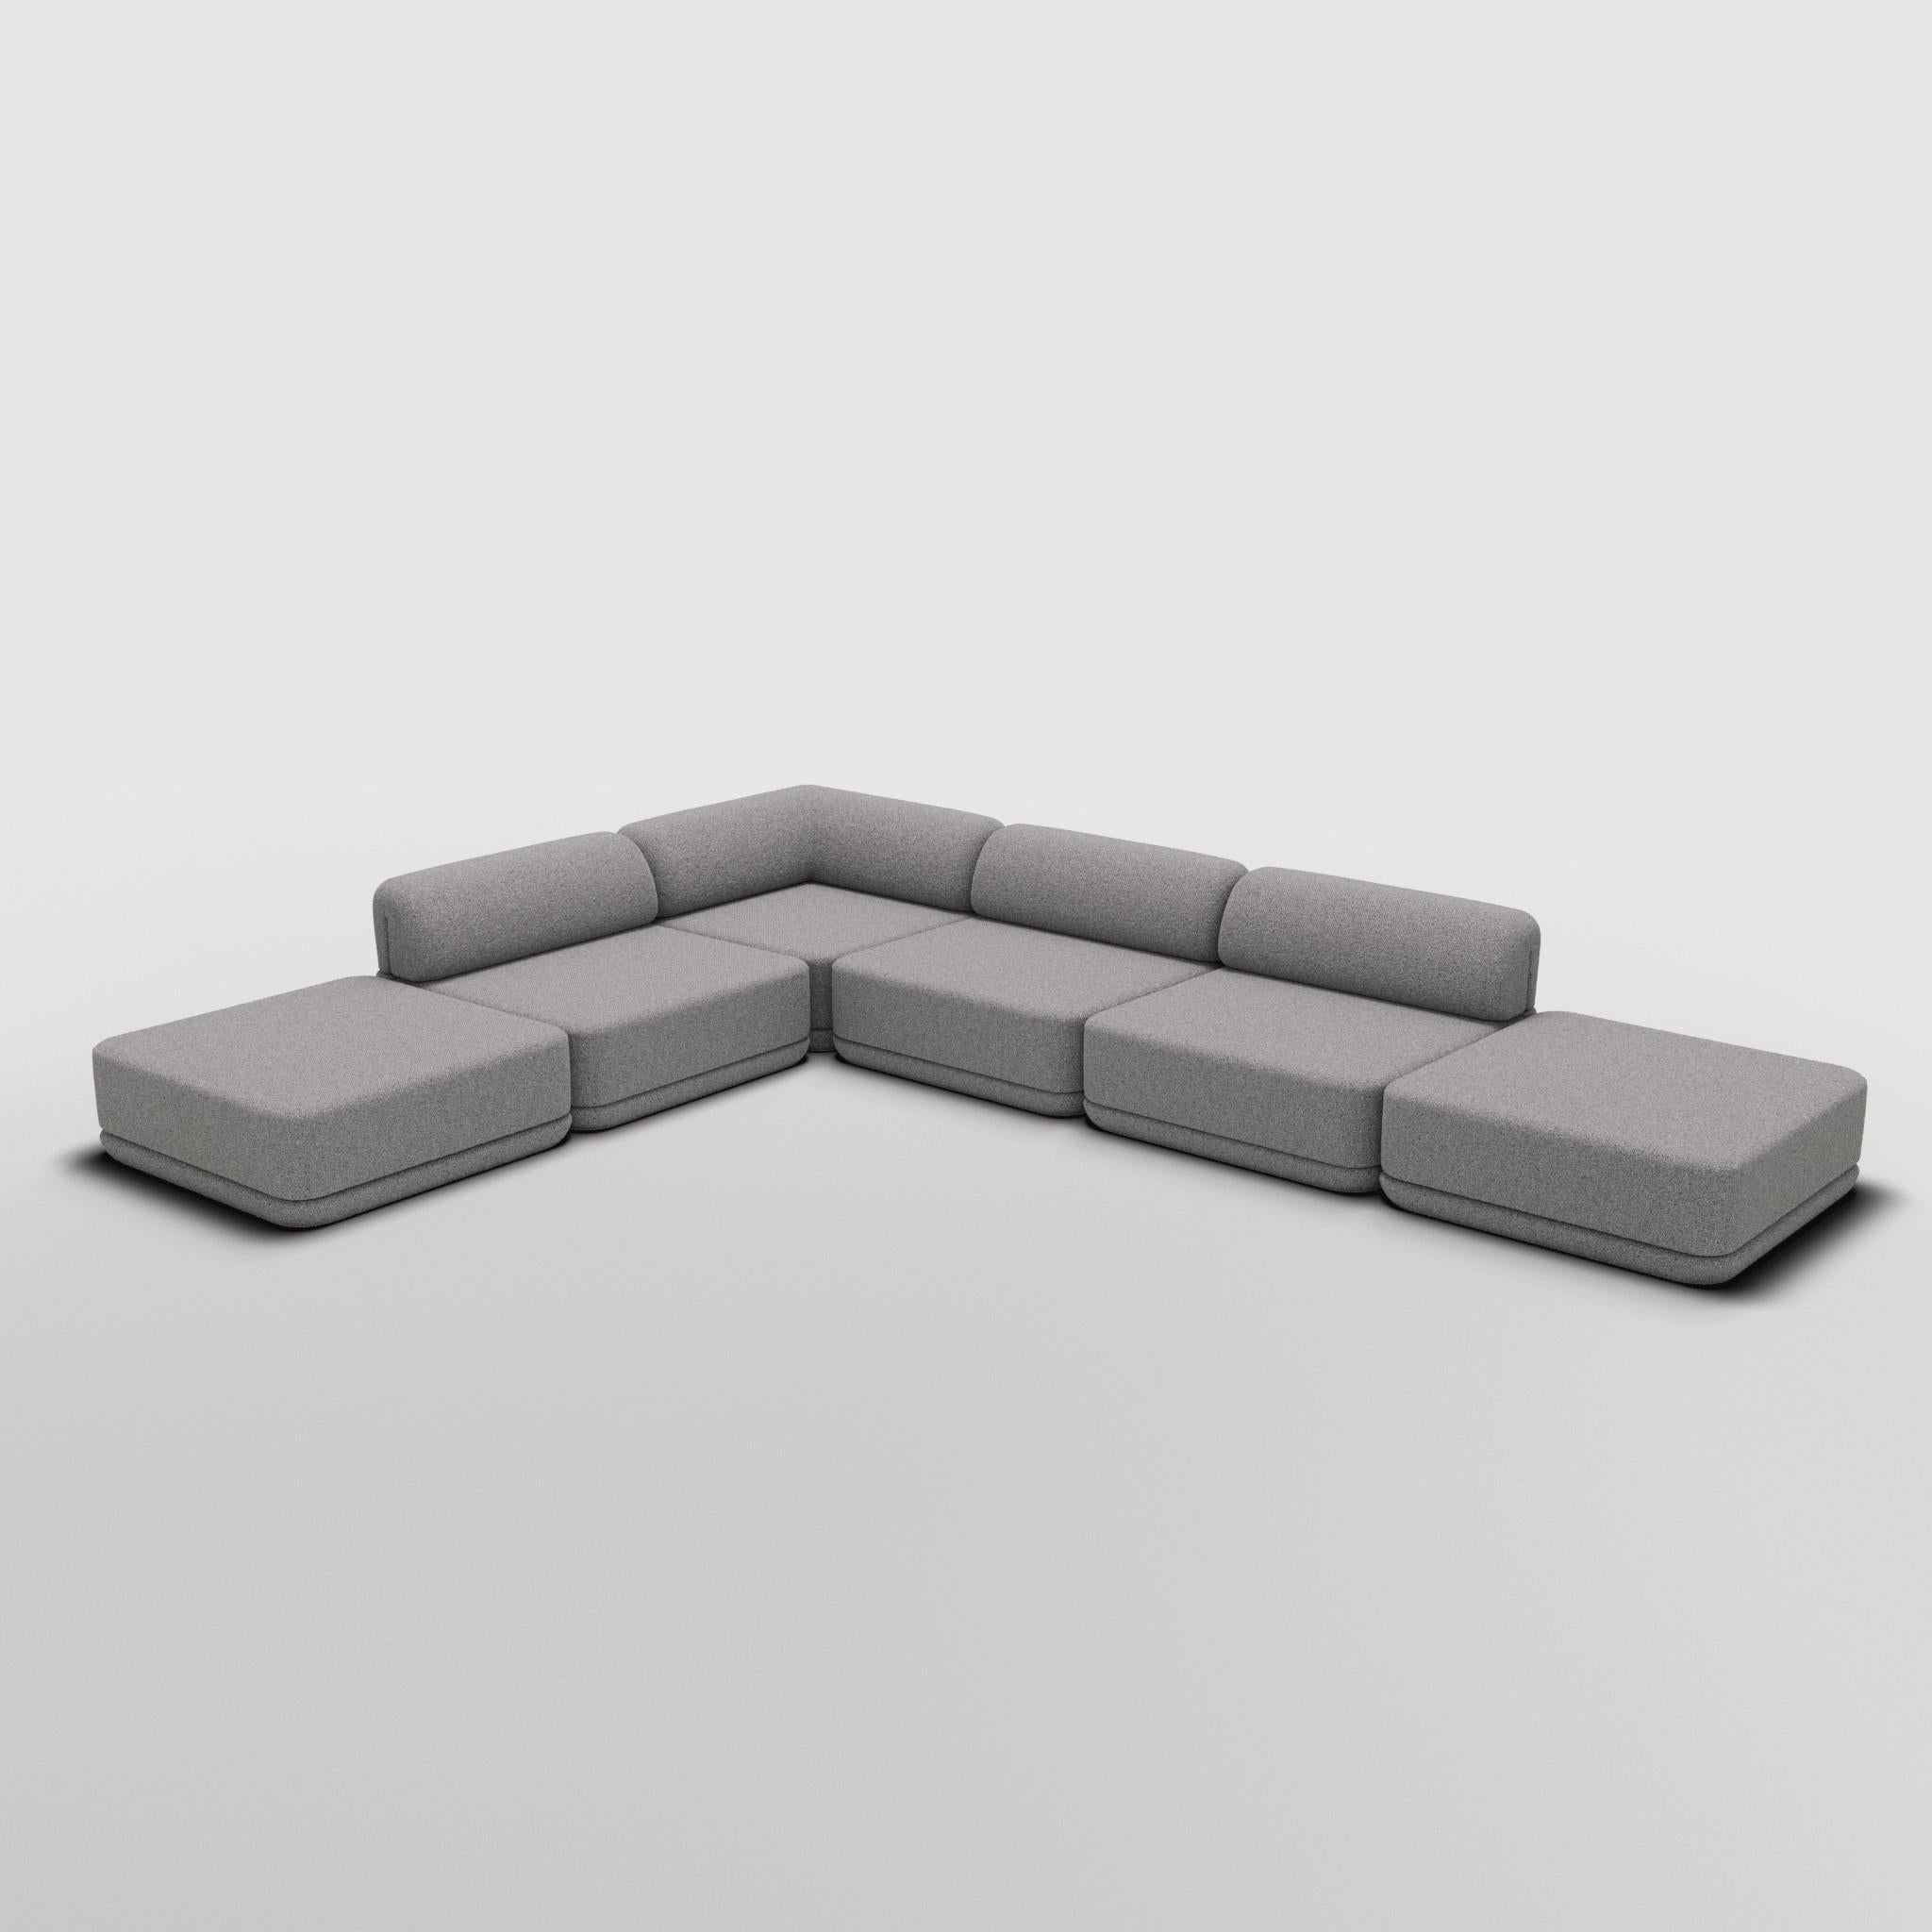 Corner Lounge Ottoman Mix Sectional - Inspired by 70s Italian Luxury Furniture

Discover The Cube Sofa, where art meets adaptability. Its sculptural design and customizable comfort create endless possibilities for your living space. Make a